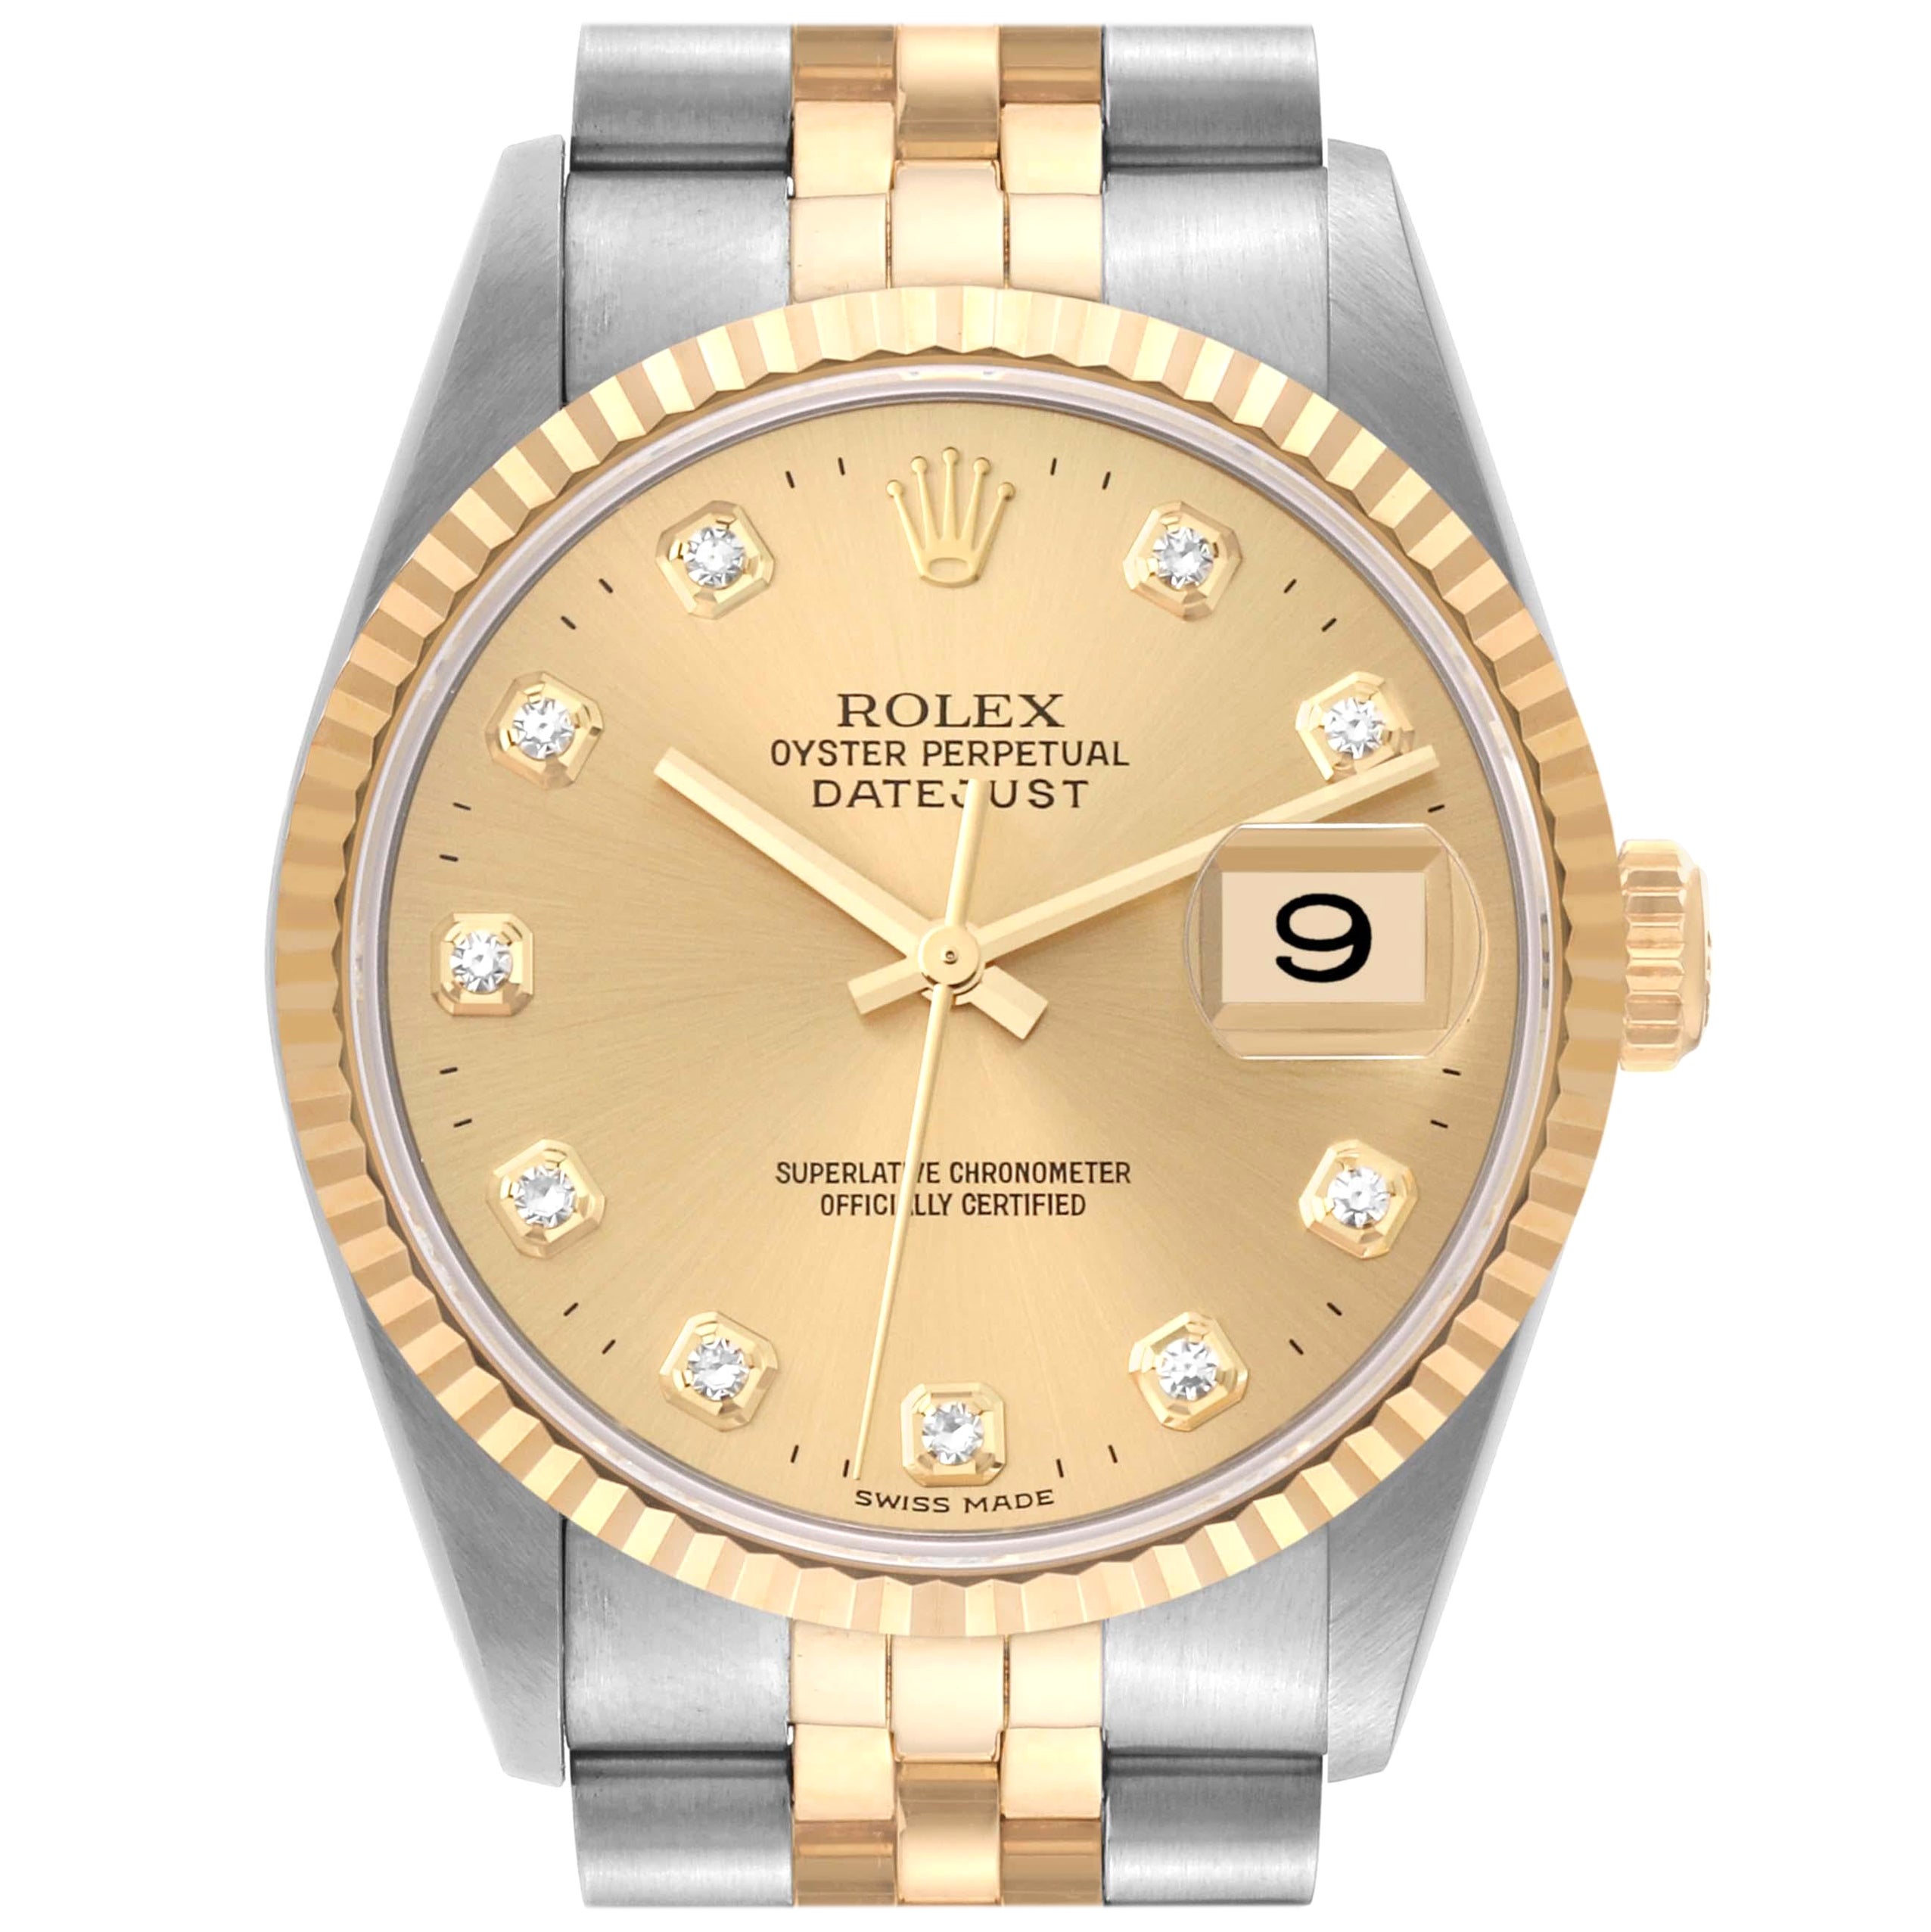 How often does a Rolex need to be serviced?